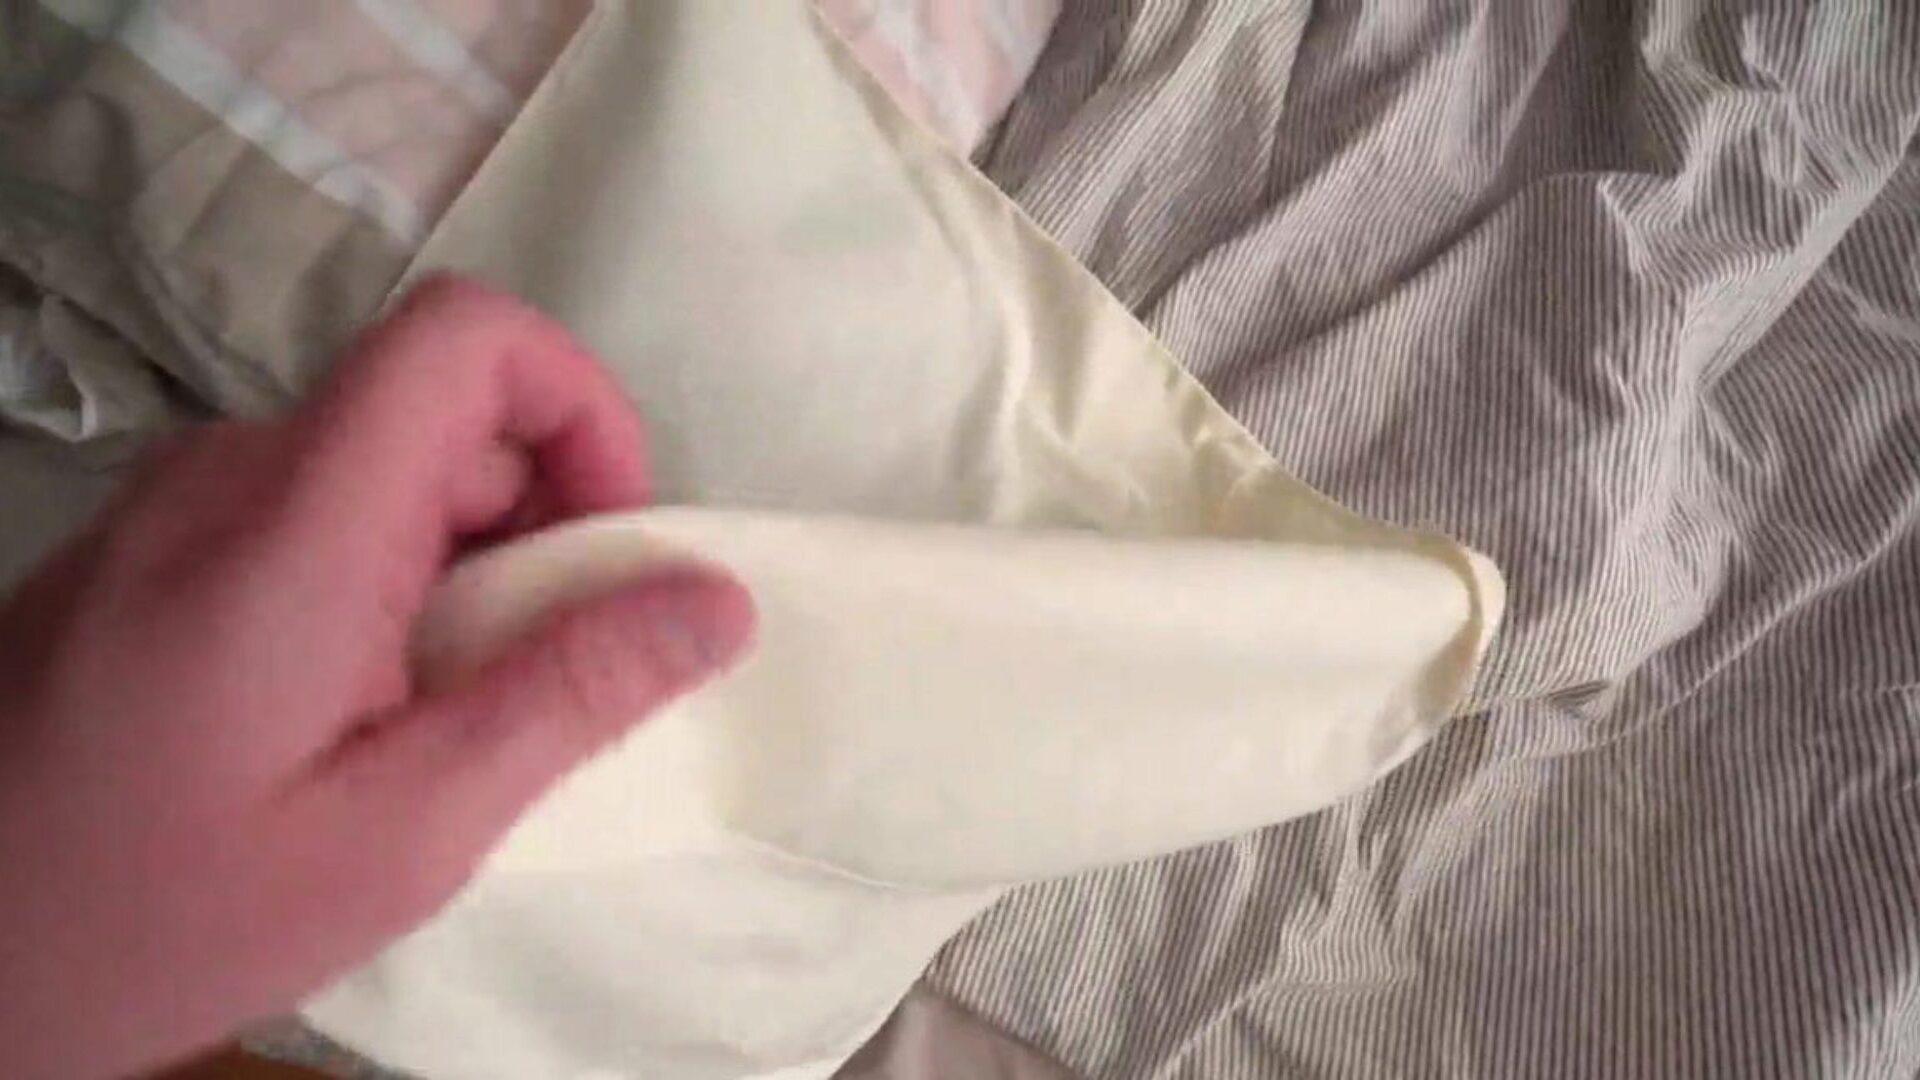 Gave step sister-in-law panties and asked for this lovemaking